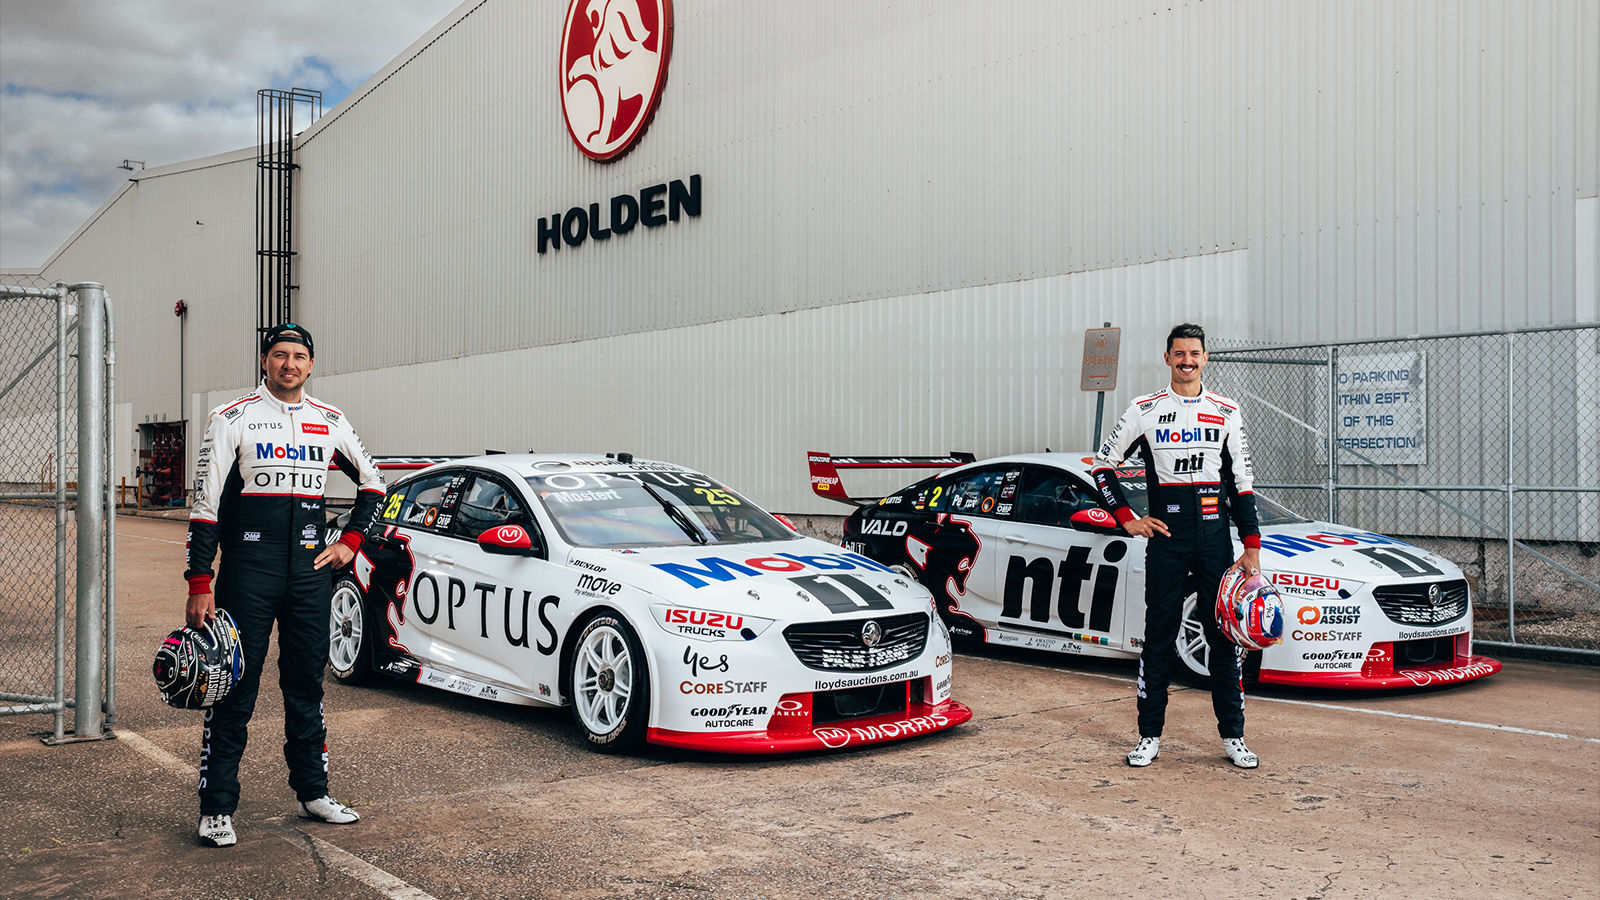 WAU Send Off Holden with Lion and Helmet Return